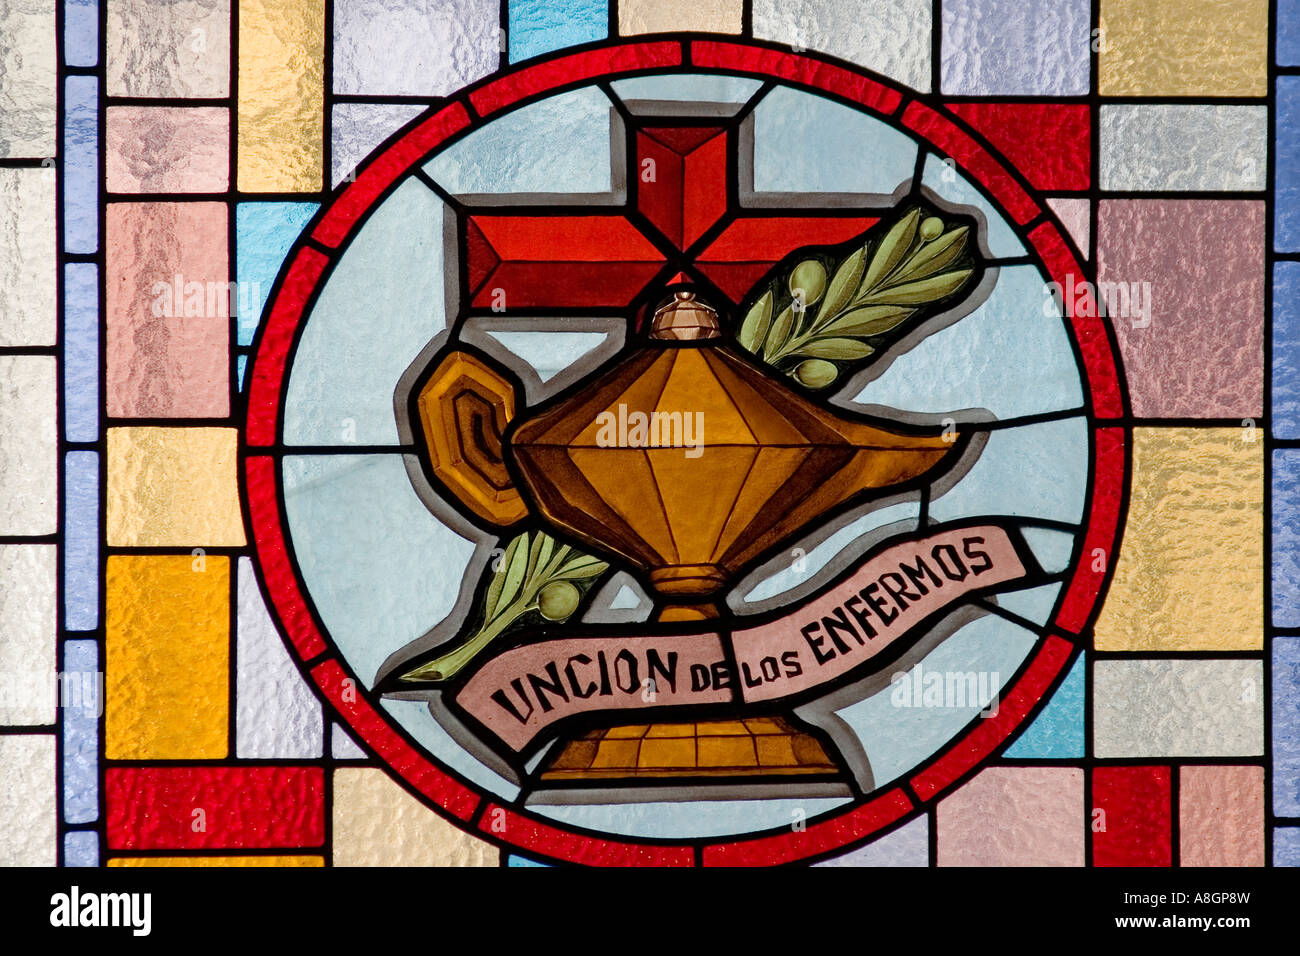 allusive show window to the sacrament of the unction of the patients in a church catholic religion Stock Photo